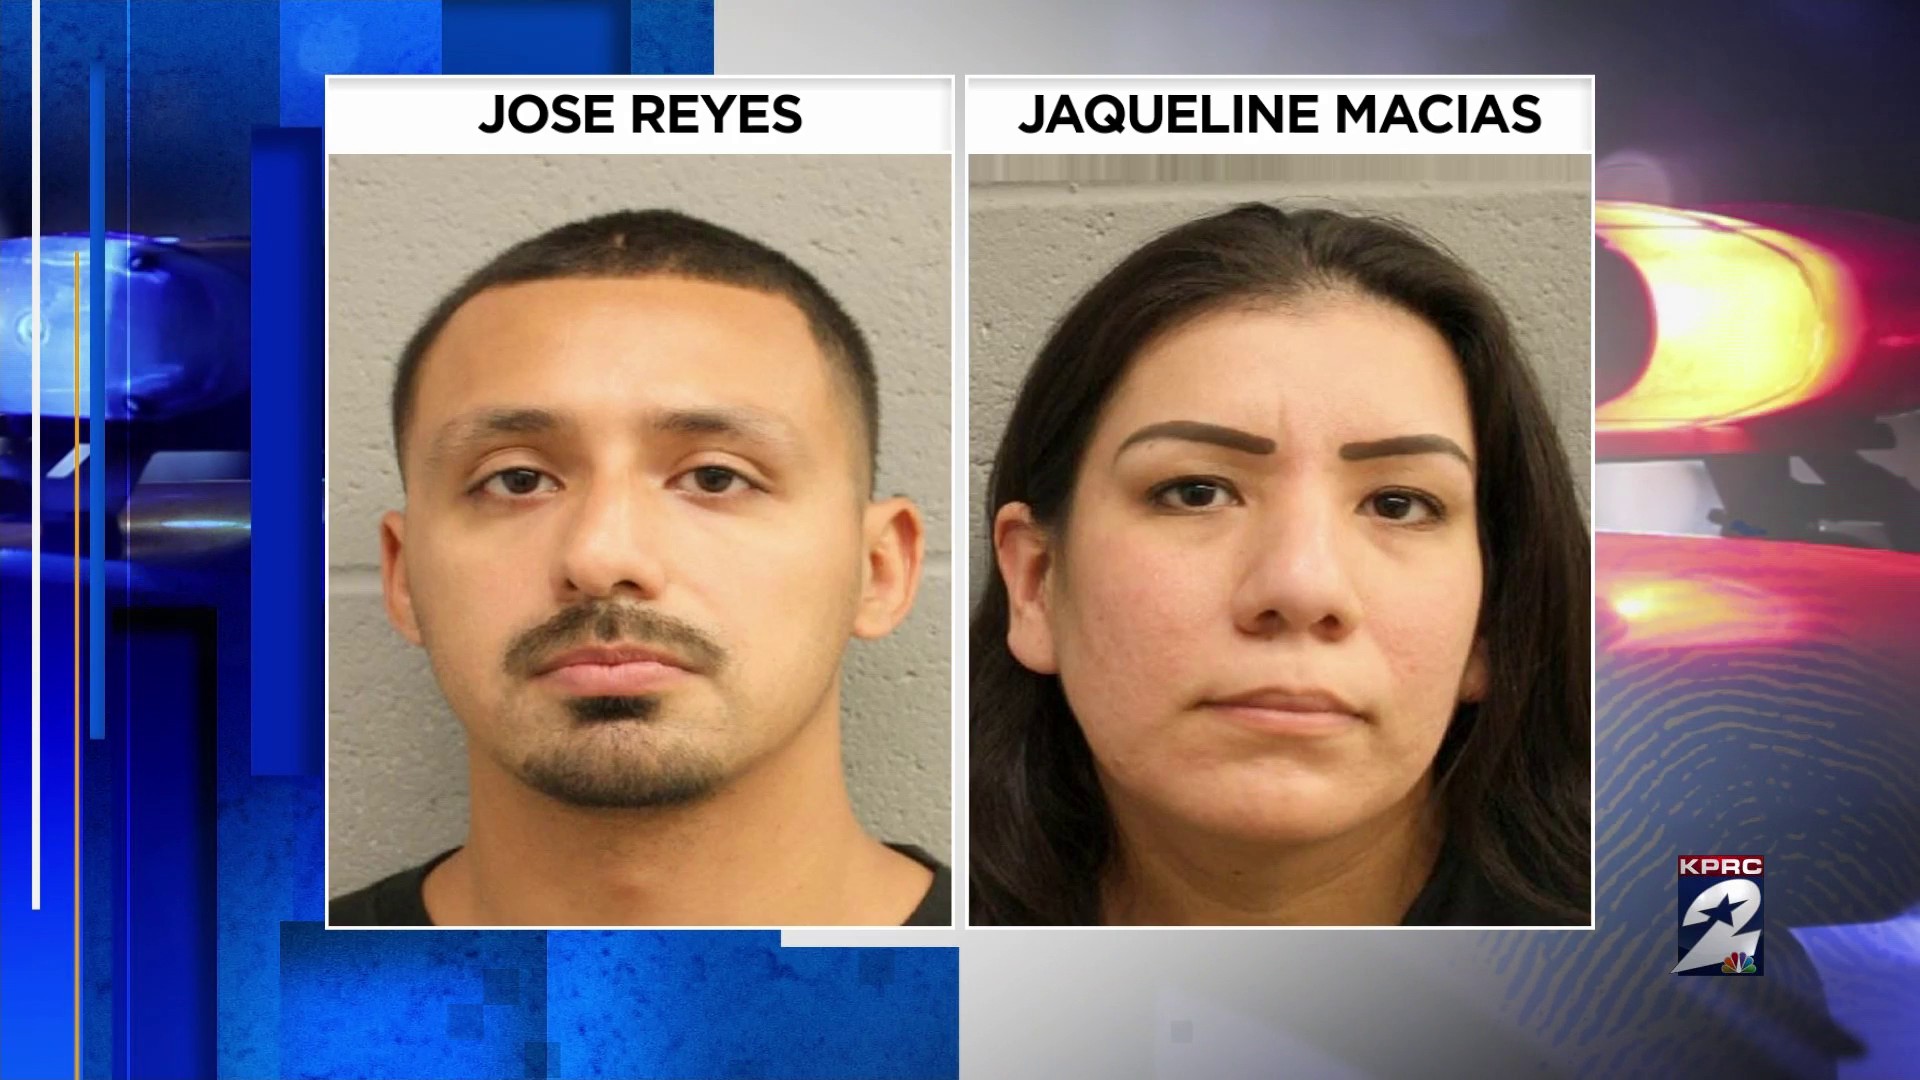 18yearsexvideo - Parents accused of chaining 18-year-old to bed, forcing her to have sex  during month-long kidnapping